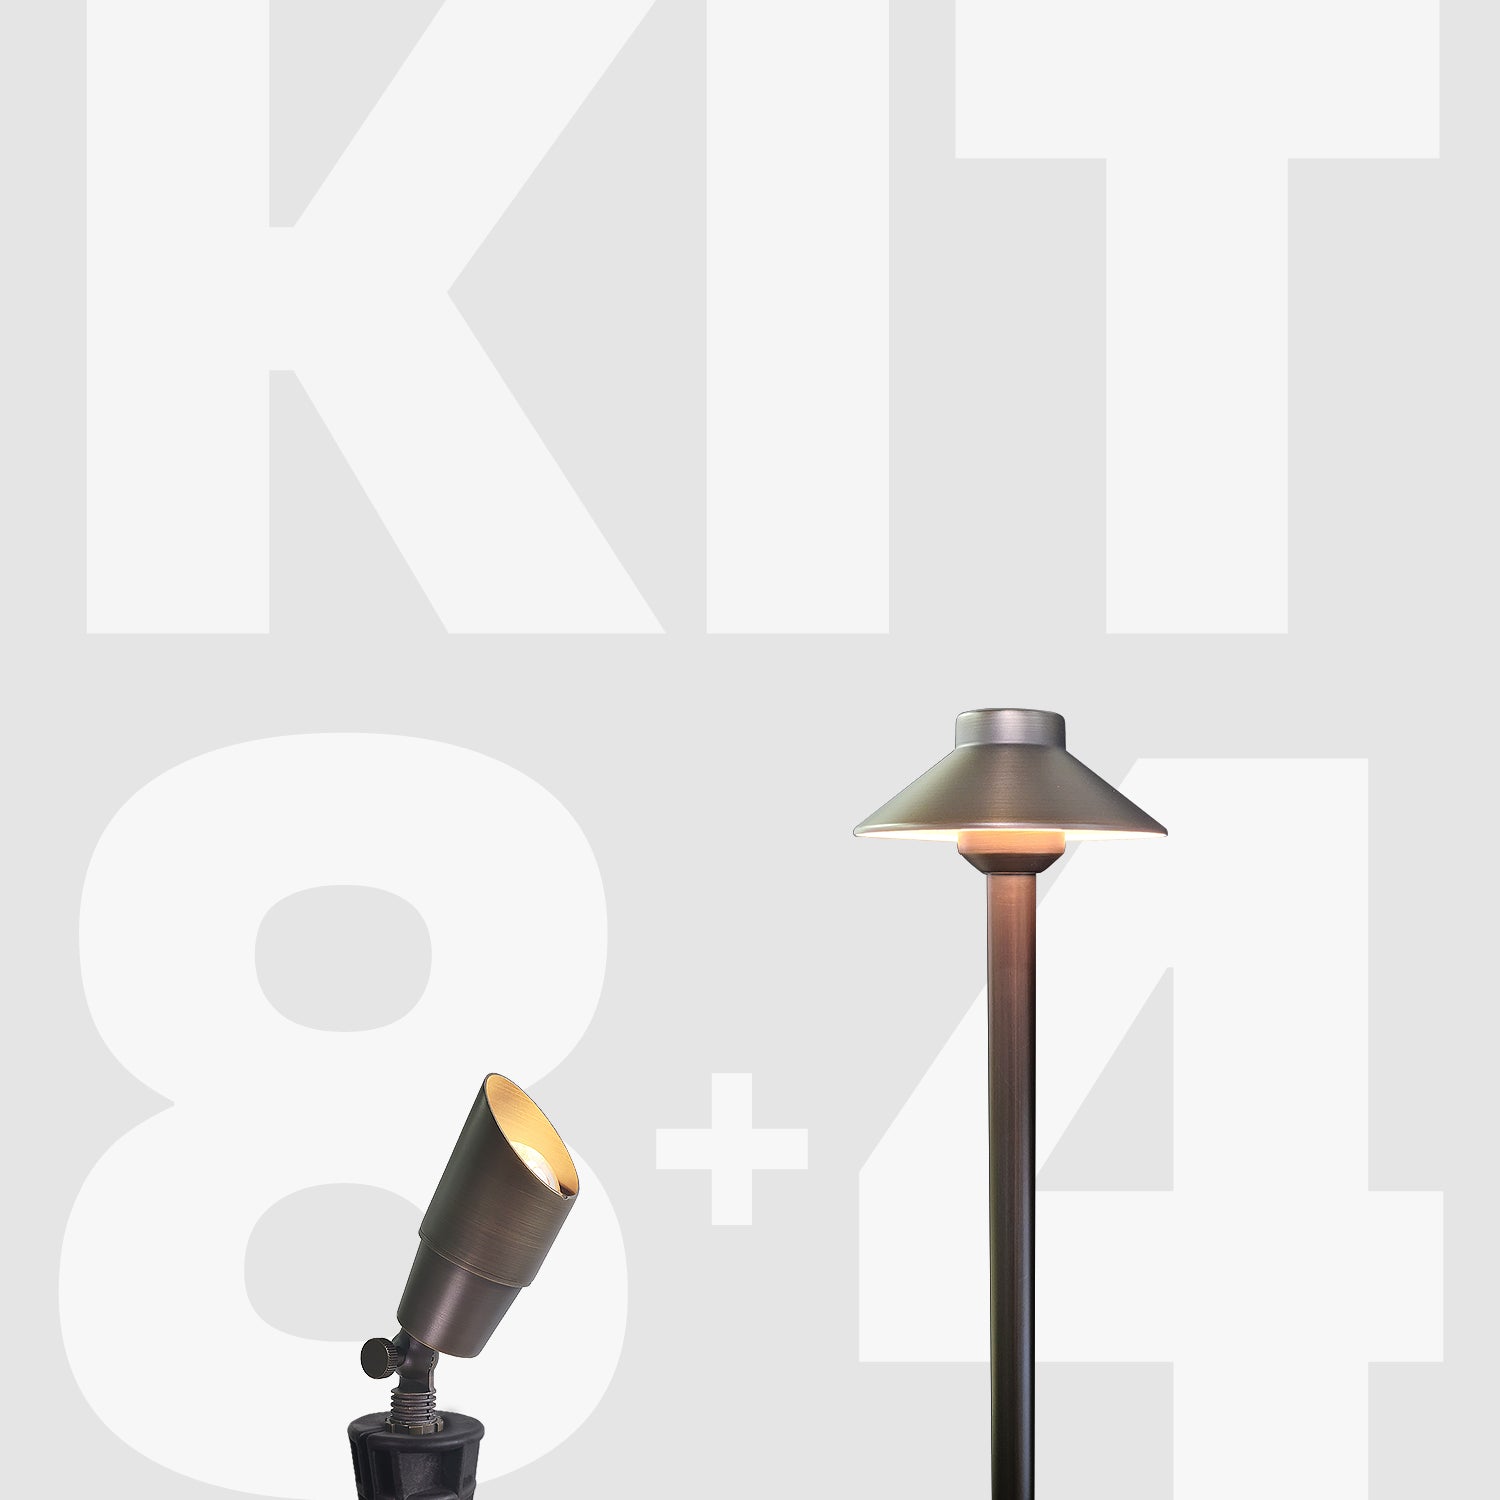 Solid brass 12V LED low voltage landscape lighting kit featuring an adjustable spotlight and a classic brass pathlight against a gray background with 'KIT' text overlay